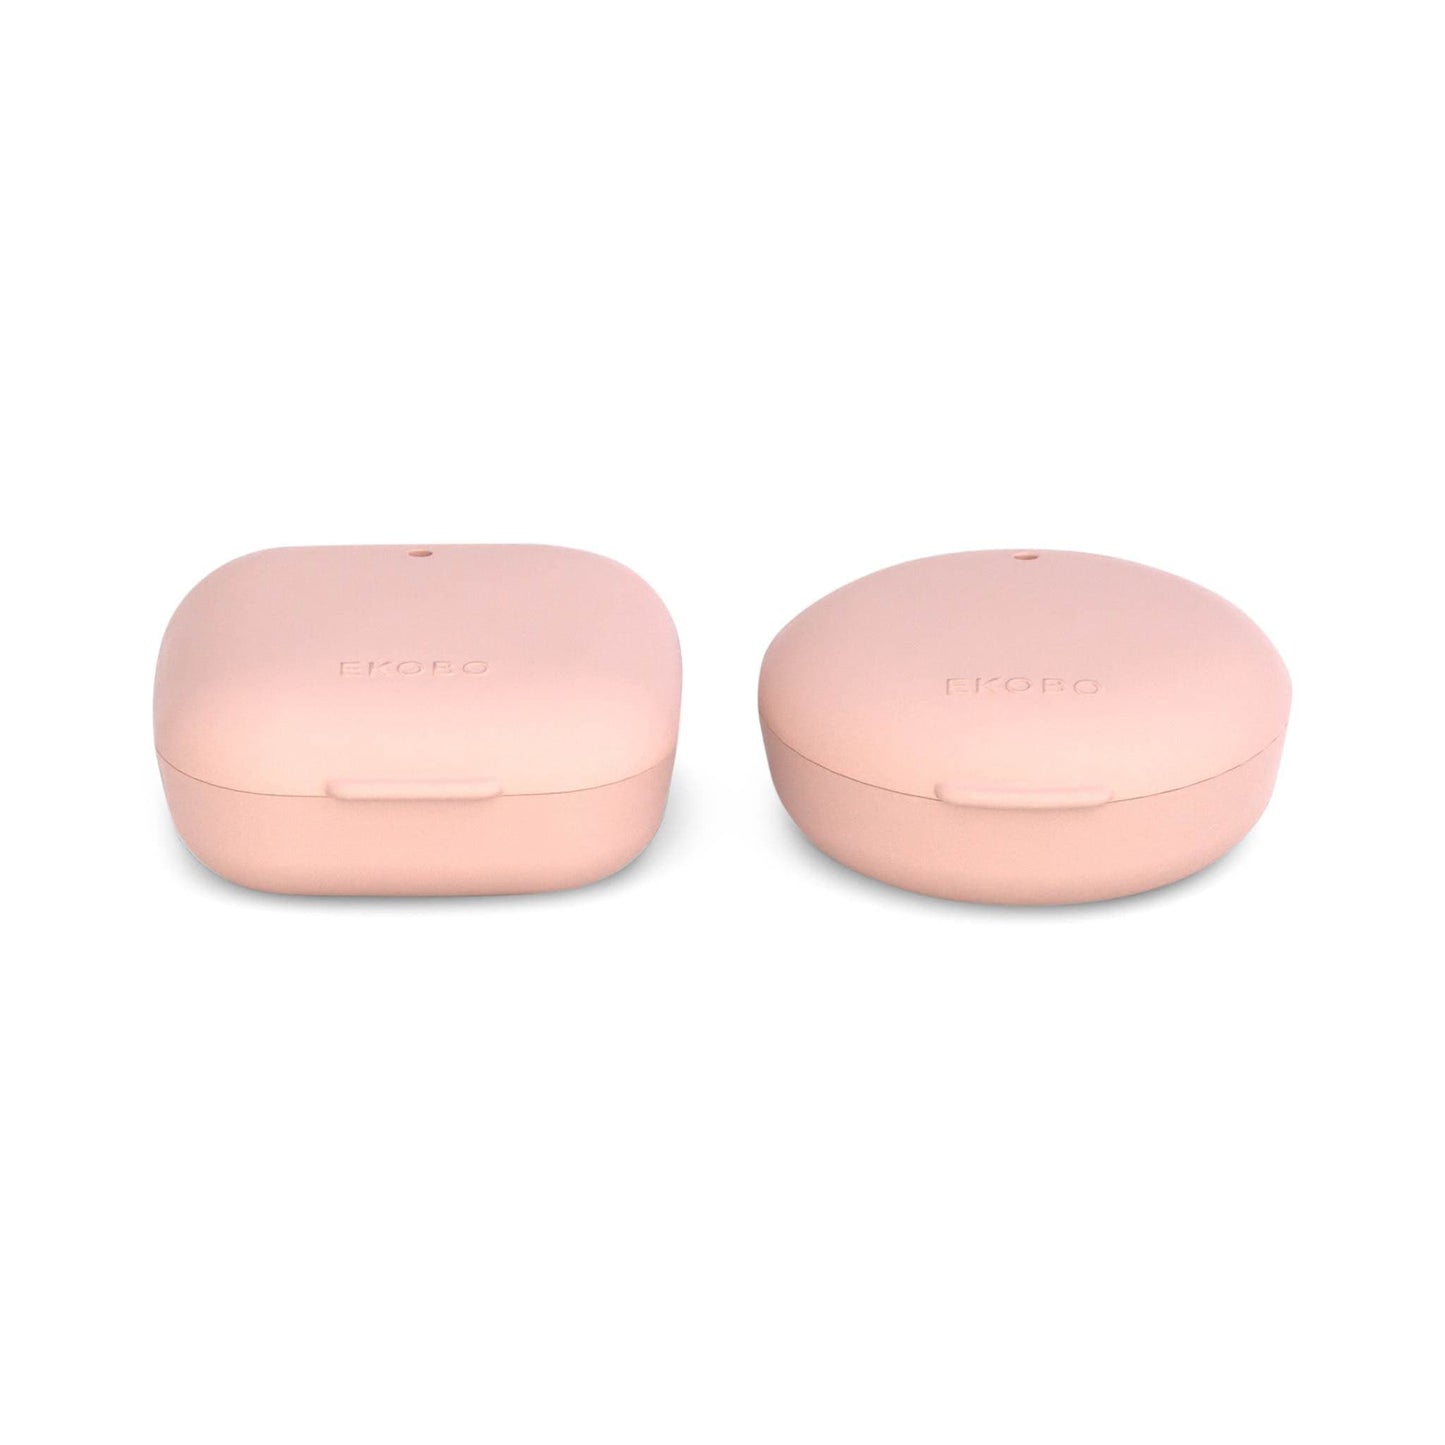 Faerly Soap Dishes & Holders Duo of Travel Soap Boxes - Blush Pink - Ekobo